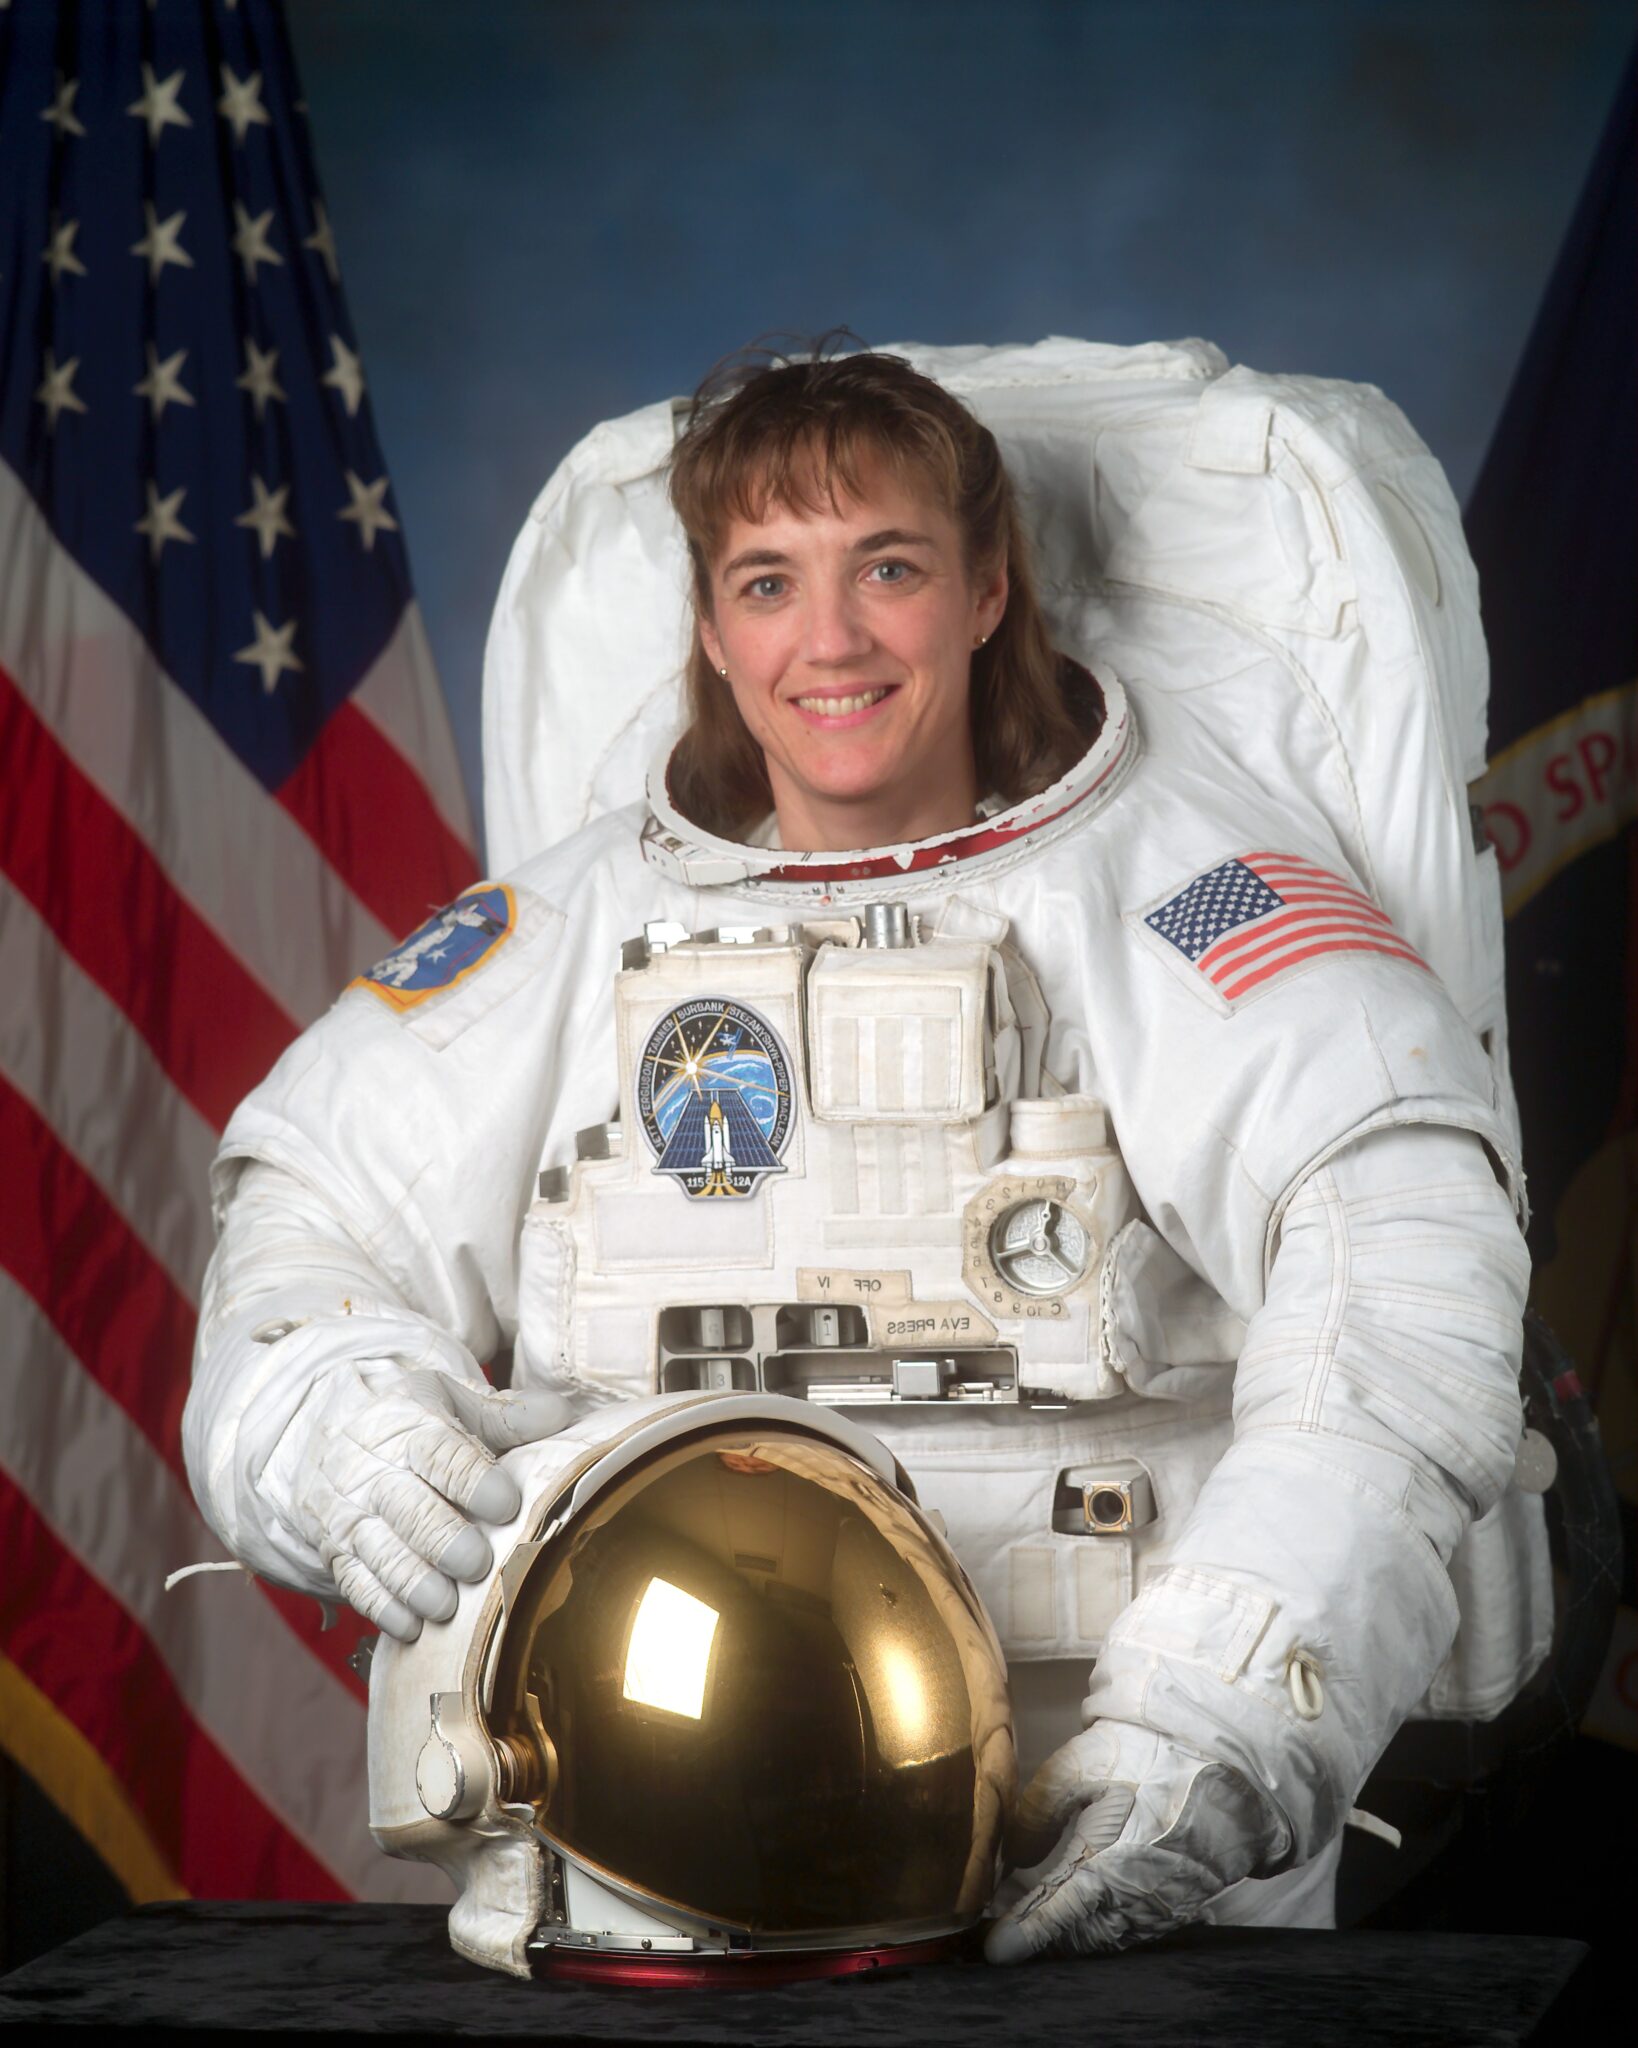 http://universemagazine.com/wp-content/uploads/2023/01/heidemarie_stefanyshyn-piper_in_white_space_suit-scaled.jpg